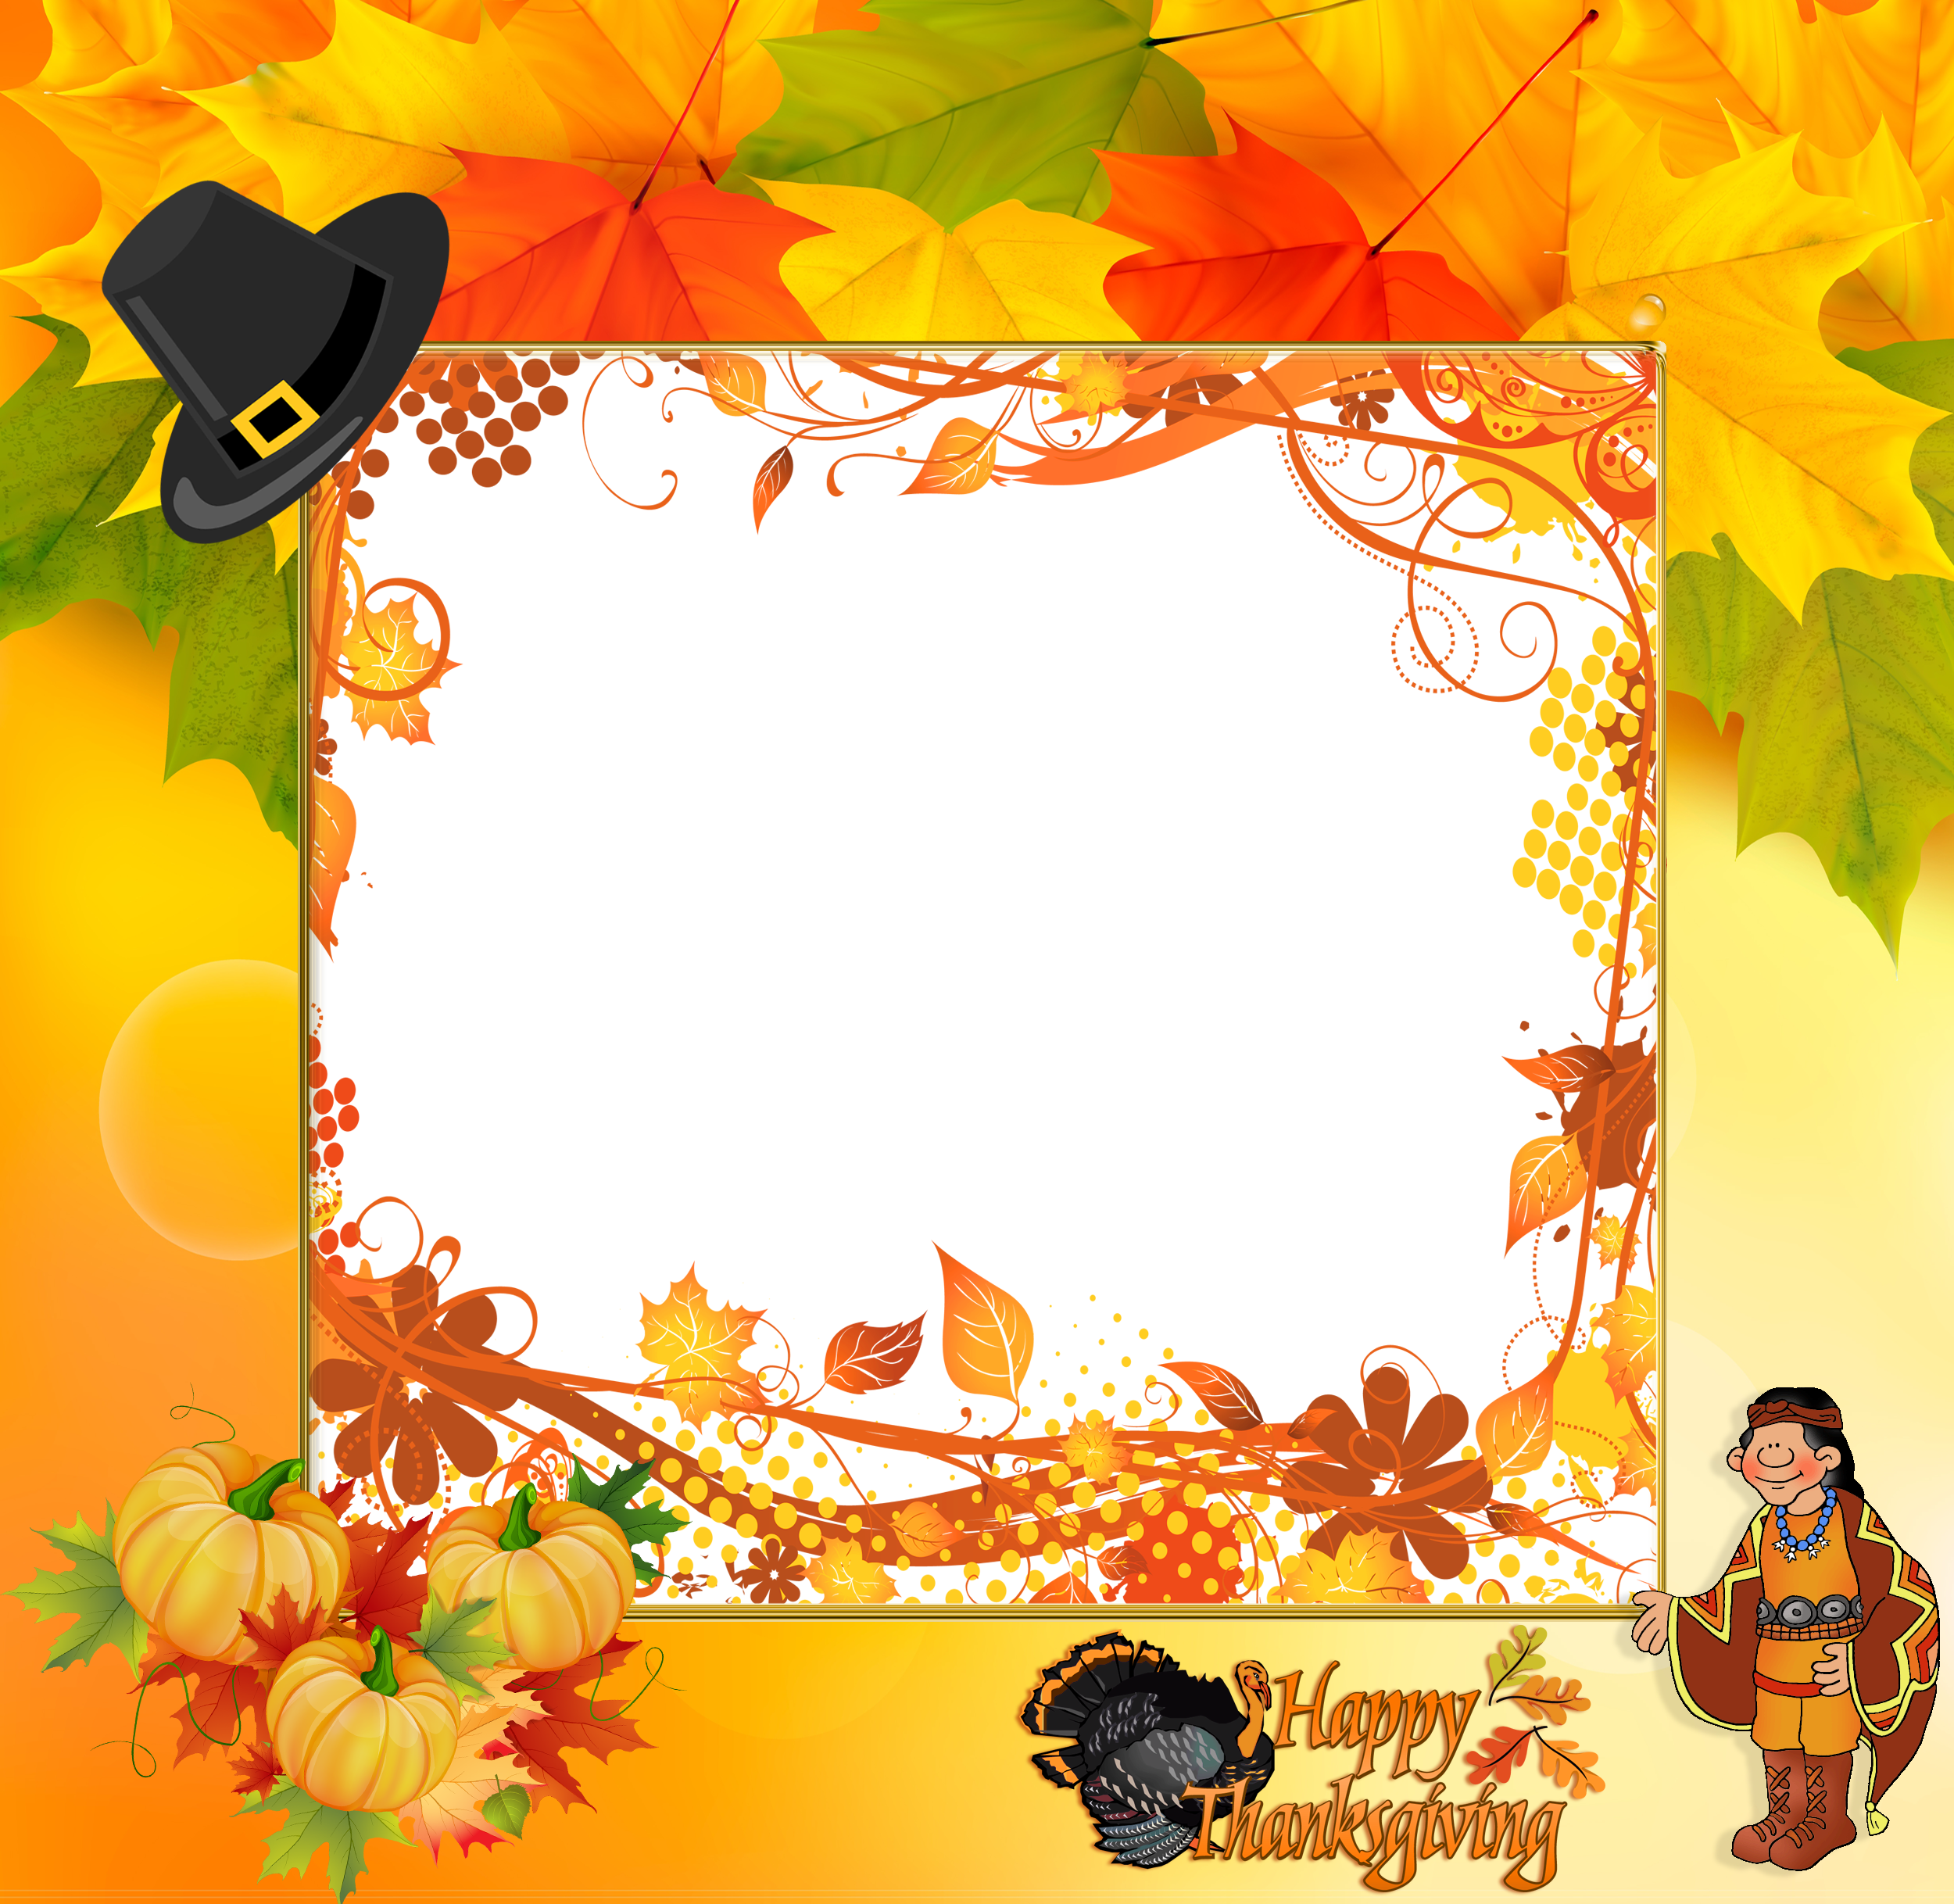 Transparent Happy Thanksgiving Frame Quality Image And Transparent PNG Free Clipart